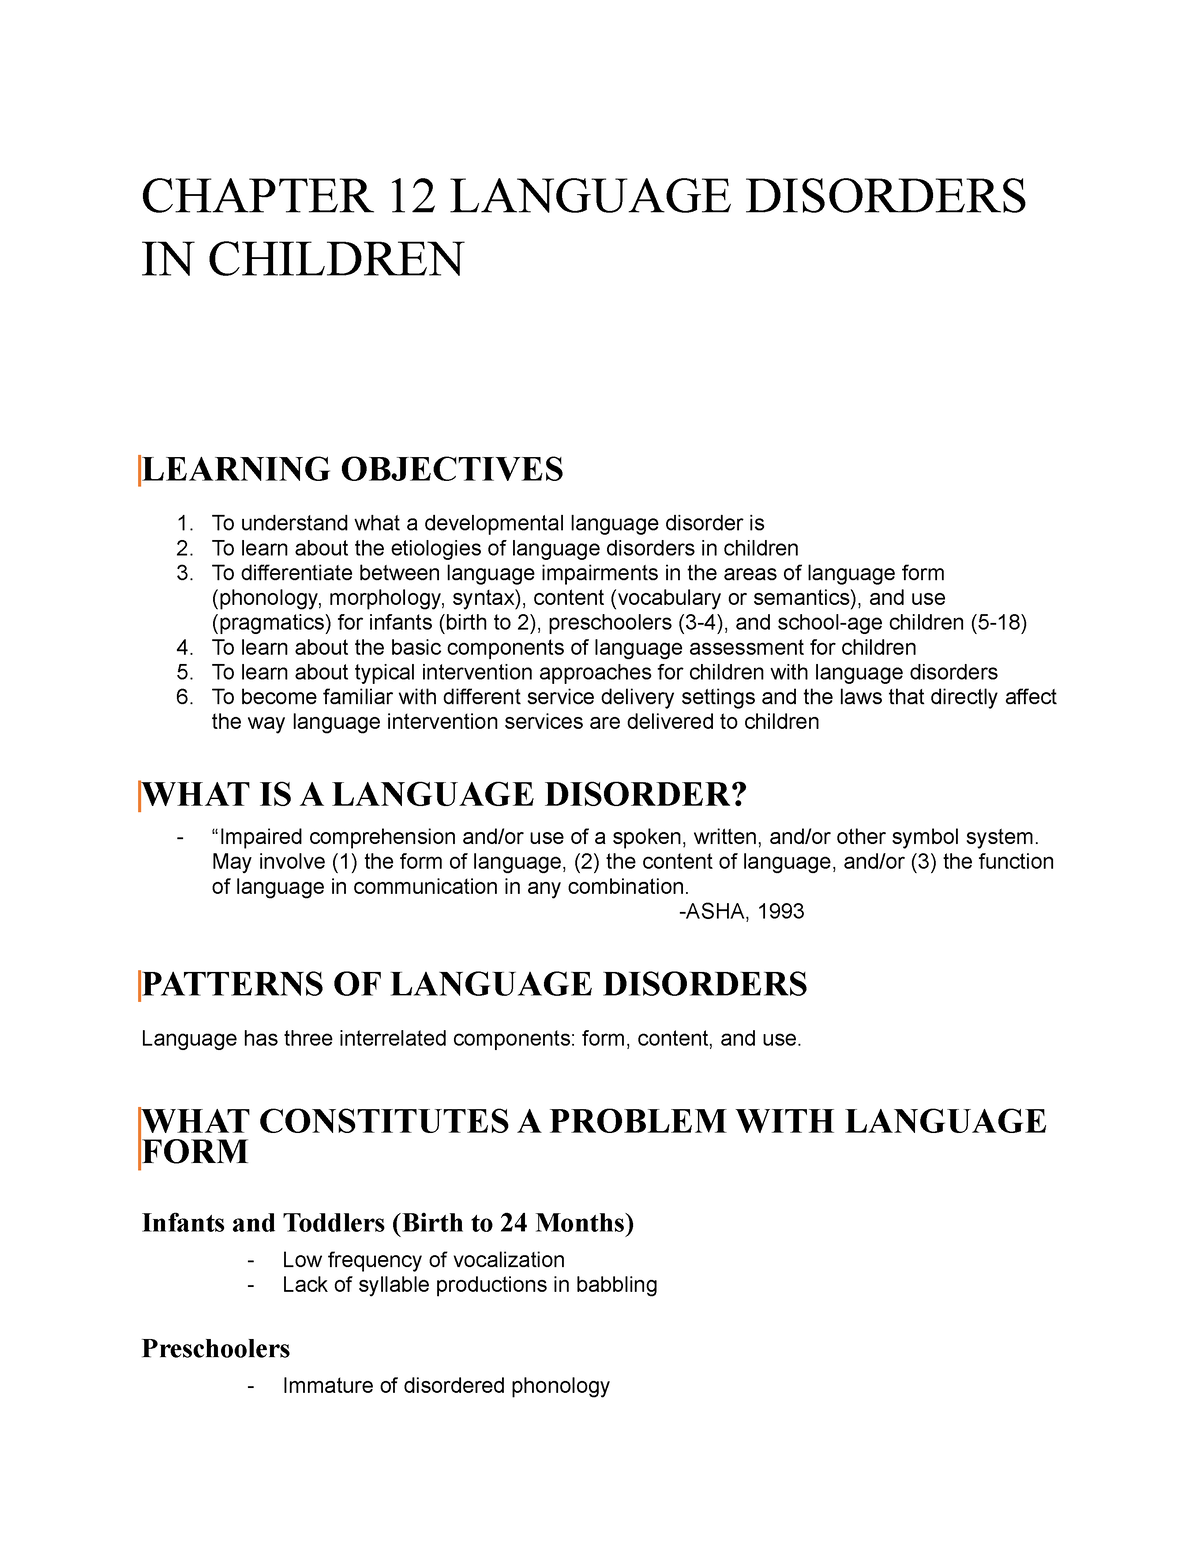 essay about language disorder